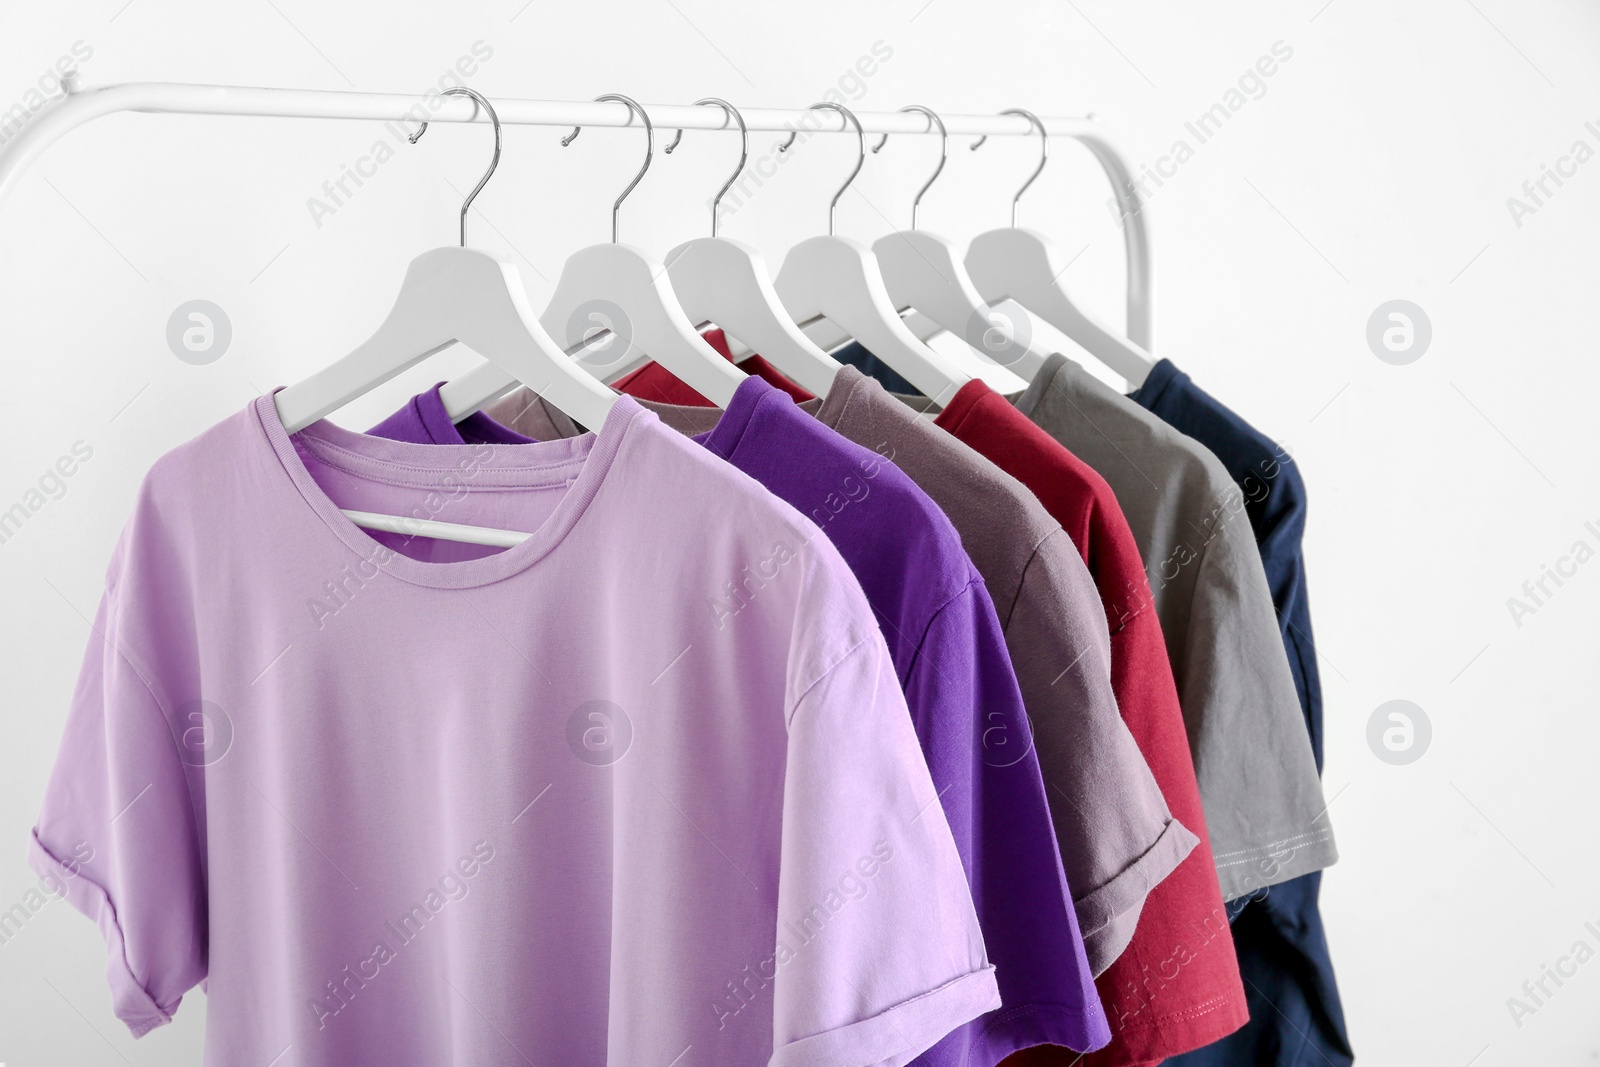 Photo of Men's clothes hanging on wardrobe rack against white background